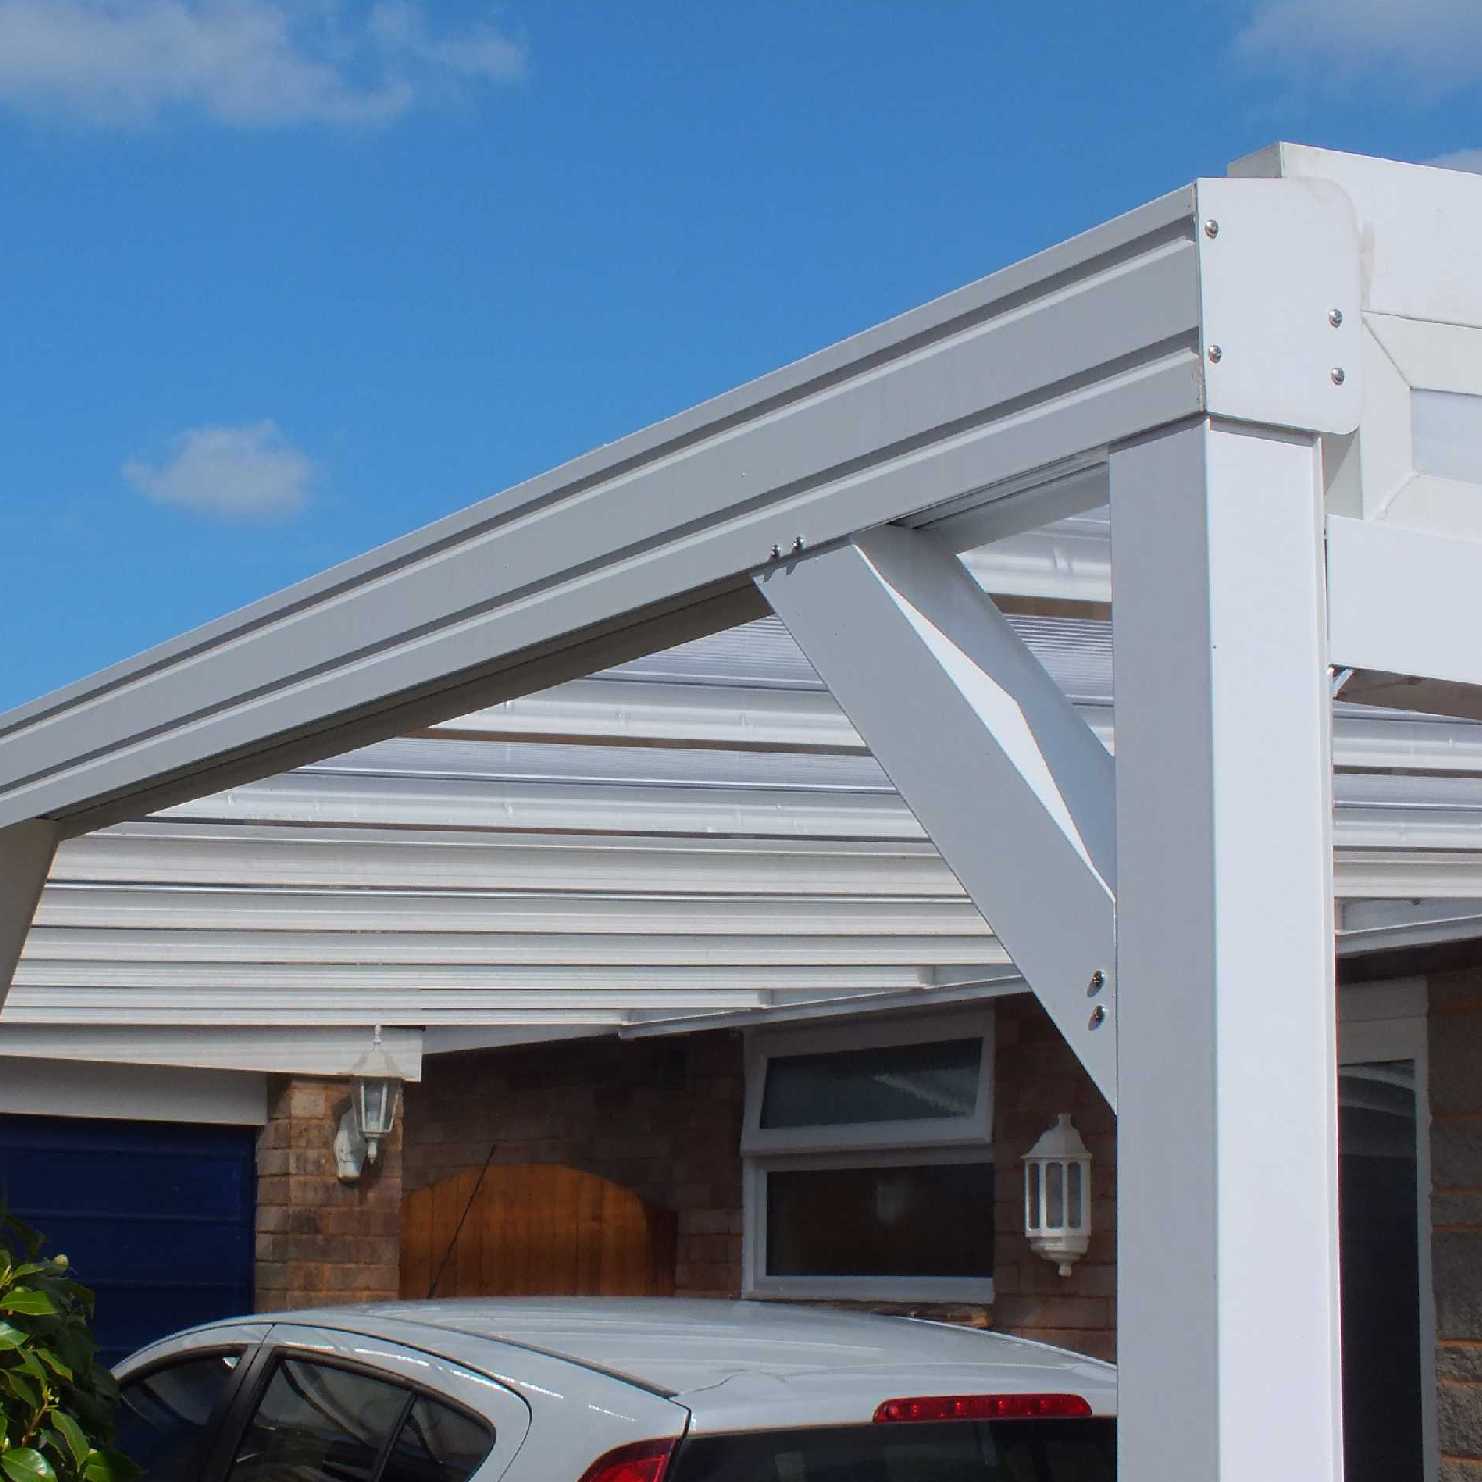 Buy Omega Smart Lean-To Canopy, White with 16mm Polycarbonate Glazing - 11.6m (W) x 2.0m (P), (5) Supporting Posts online today